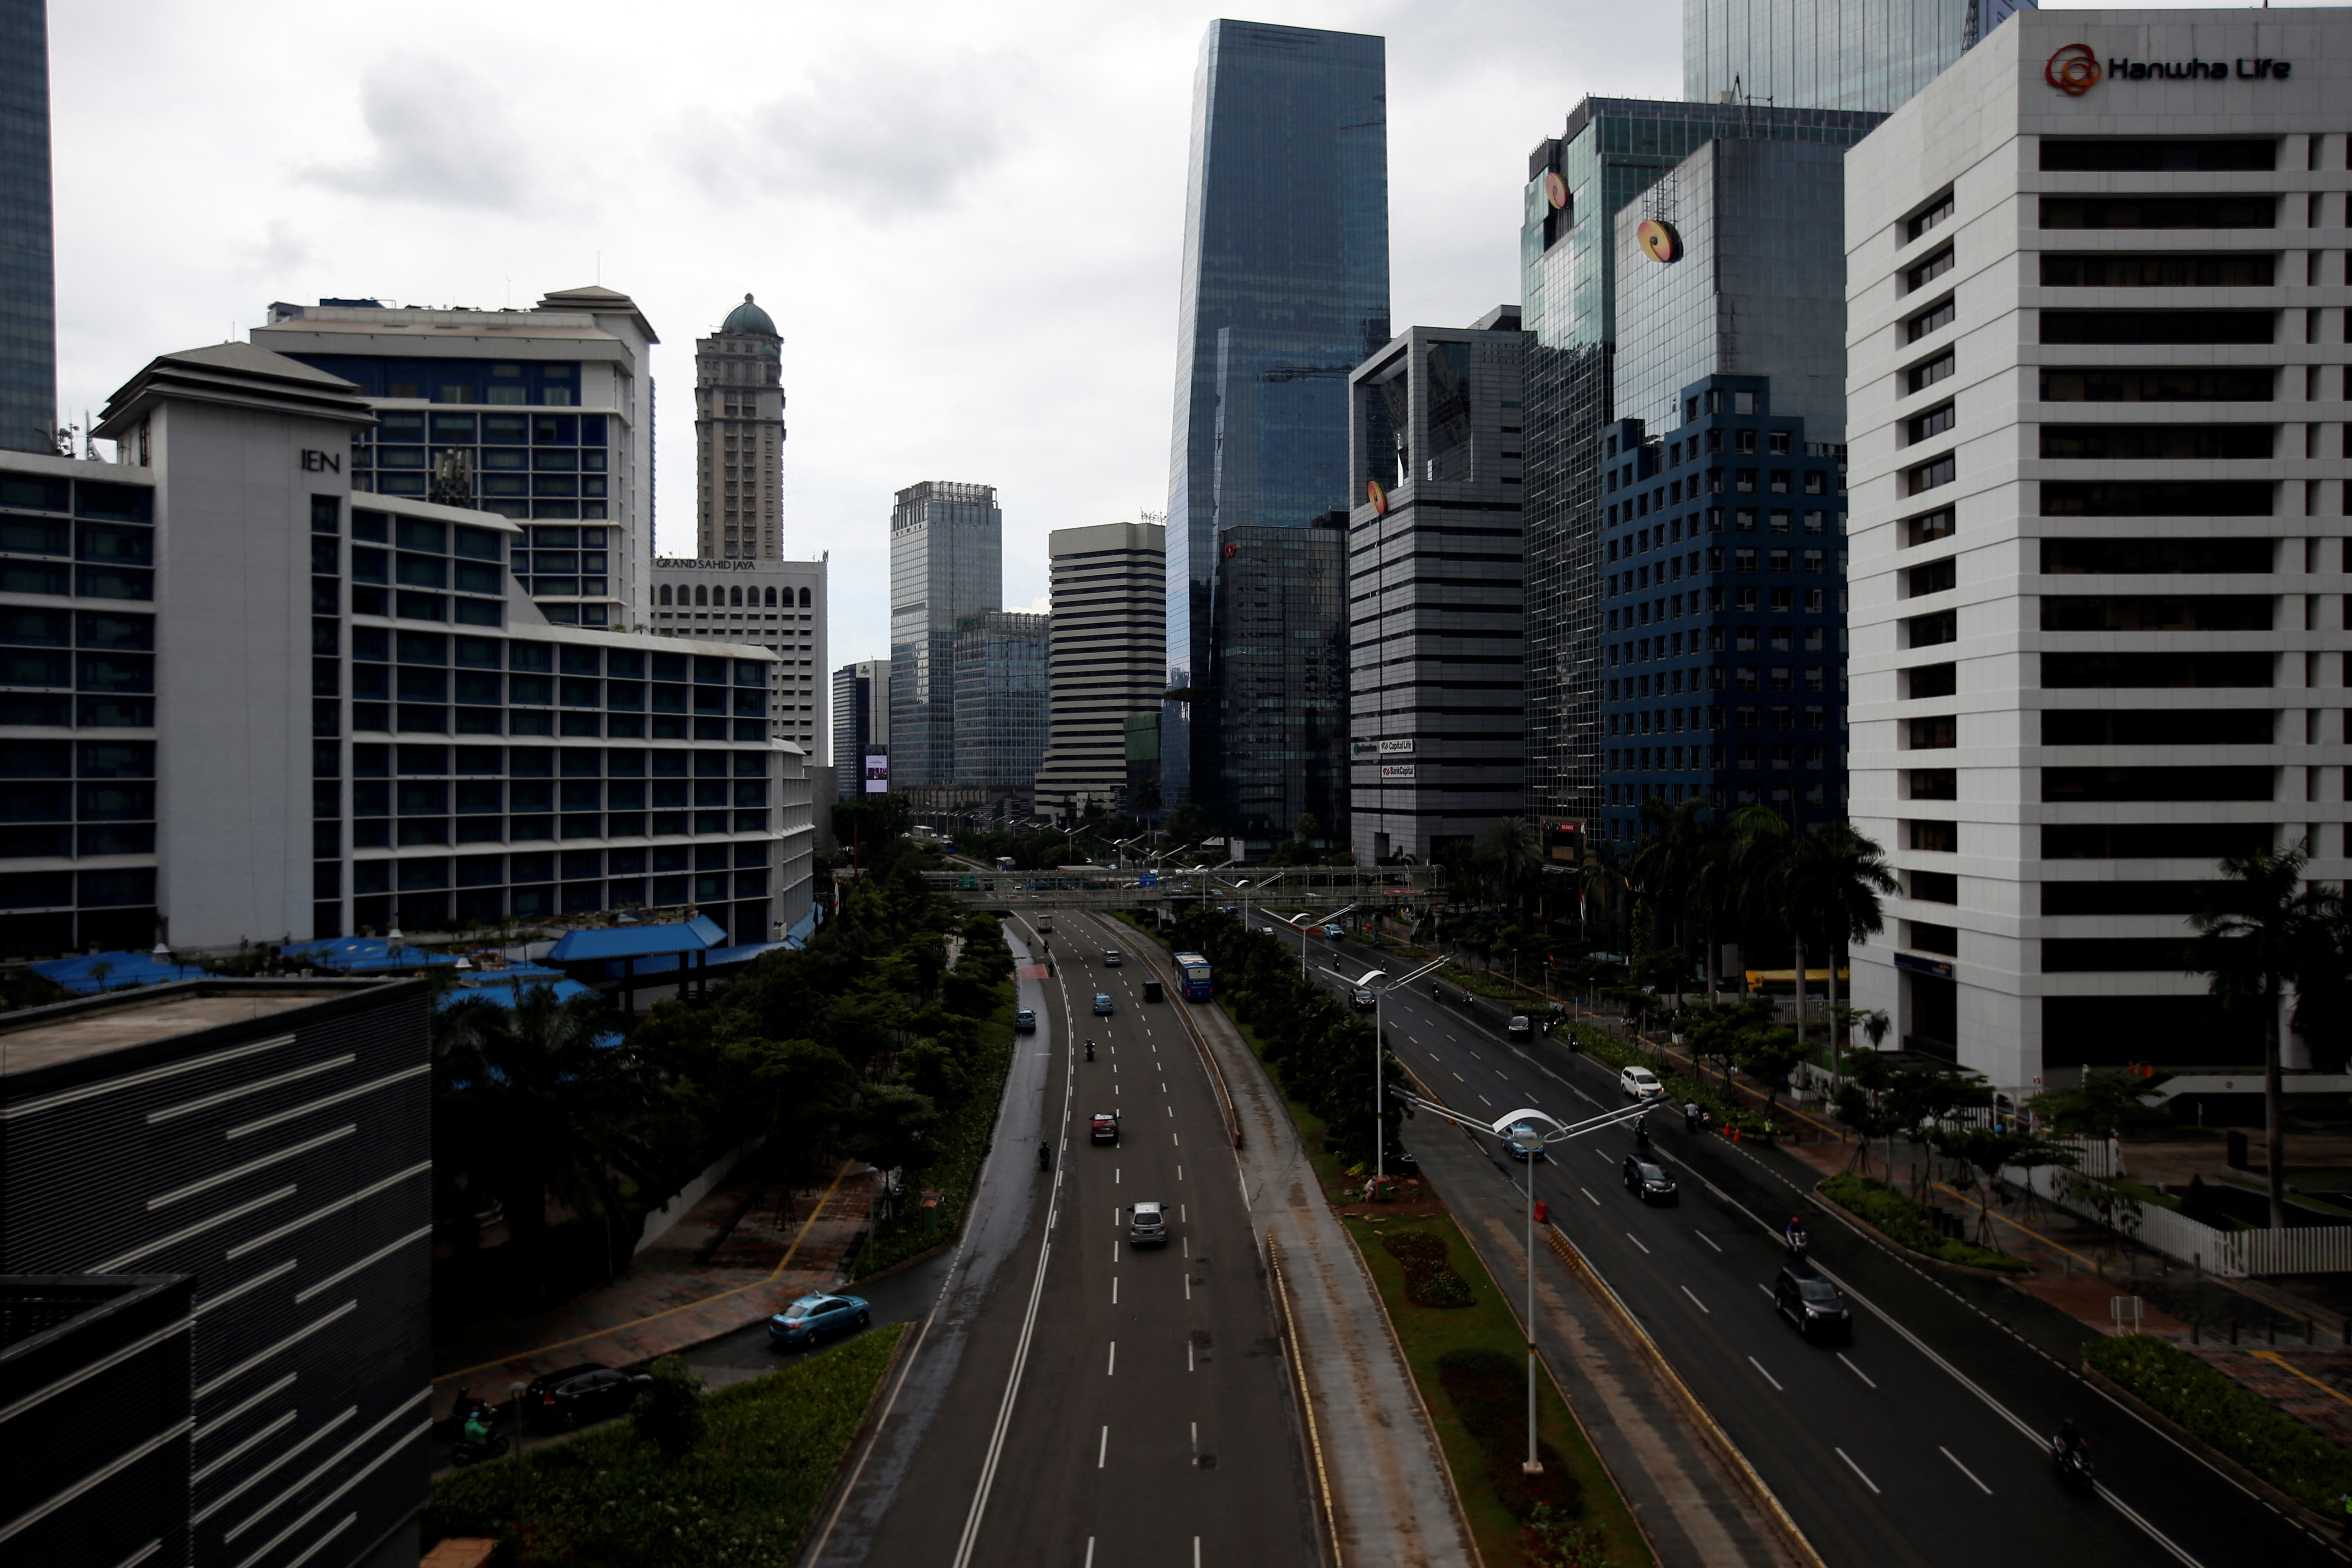 General view of the main road at the business district after Indonesia's capital begins a two-week emergency period to prevent the spread of coronavirus disease (COVID-19) in Jakarta